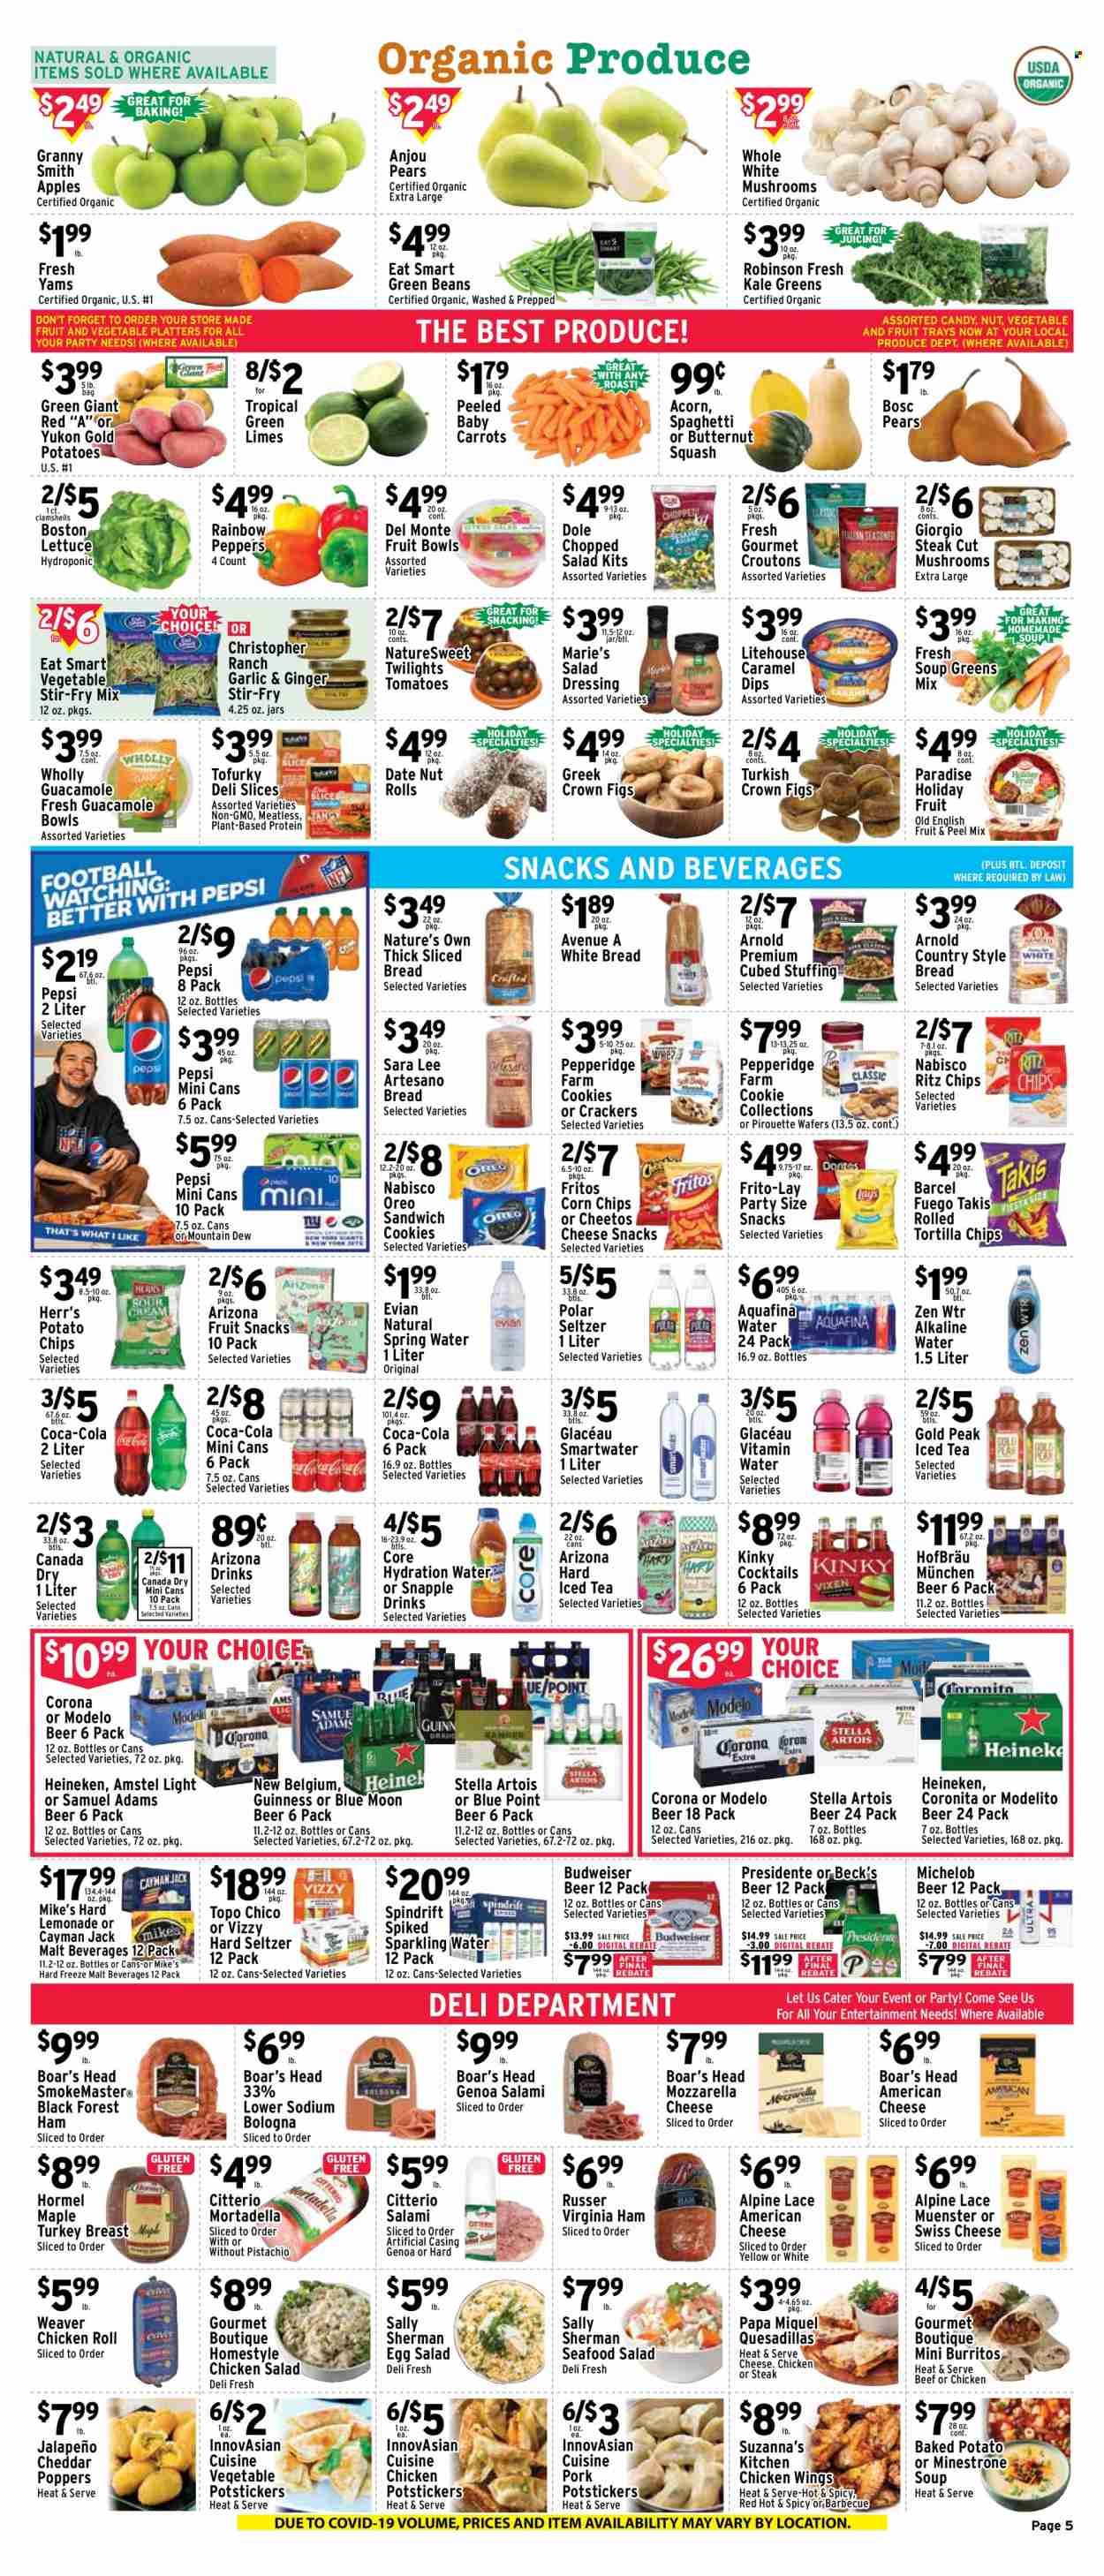 thumbnail - Met Foodmarkets Flyer - 11/27/2022 - 12/03/2022 - Sales products - mushrooms, bread, white bread, Sara Lee, beans, carrots, green beans, tomatoes, kale, lettuce, Dole, peppers, jalapeño, chopped salad, apples, figs, limes, pears, Granny Smith, seafood, spaghetti, sandwich, soup, burrito, Hormel, mortadella, salami, ham, bologna sausage, virginia ham, guacamole, seafood salad, chicken salad, american cheese, mozzarella, swiss cheese, Münster cheese, Oreo, eggs, chicken wings, cookies, sandwich cookies, wafers, crackers, fruit snack, RITZ, Fritos, tortilla chips, potato chips, Cheetos, chips, corn chips, Frito-Lay, croutons, malt, Del Monte, caramel, salad dressing, dressing, dried figs, Canada Dry, Coca-Cola, lemonade, Mountain Dew, Pepsi, ice tea, AriZona, Snapple, Spindrift, Aquafina, spring water, sparkling water, Smartwater, alkaline water, Evian, vitamin water, Hard Seltzer, beer, Corona Extra, Heineken, Guinness, Beck's, Modelo, turkey breast, steak, Budweiser, butternut squash, Stella Artois, Blue Moon, Michelob. Page 5.